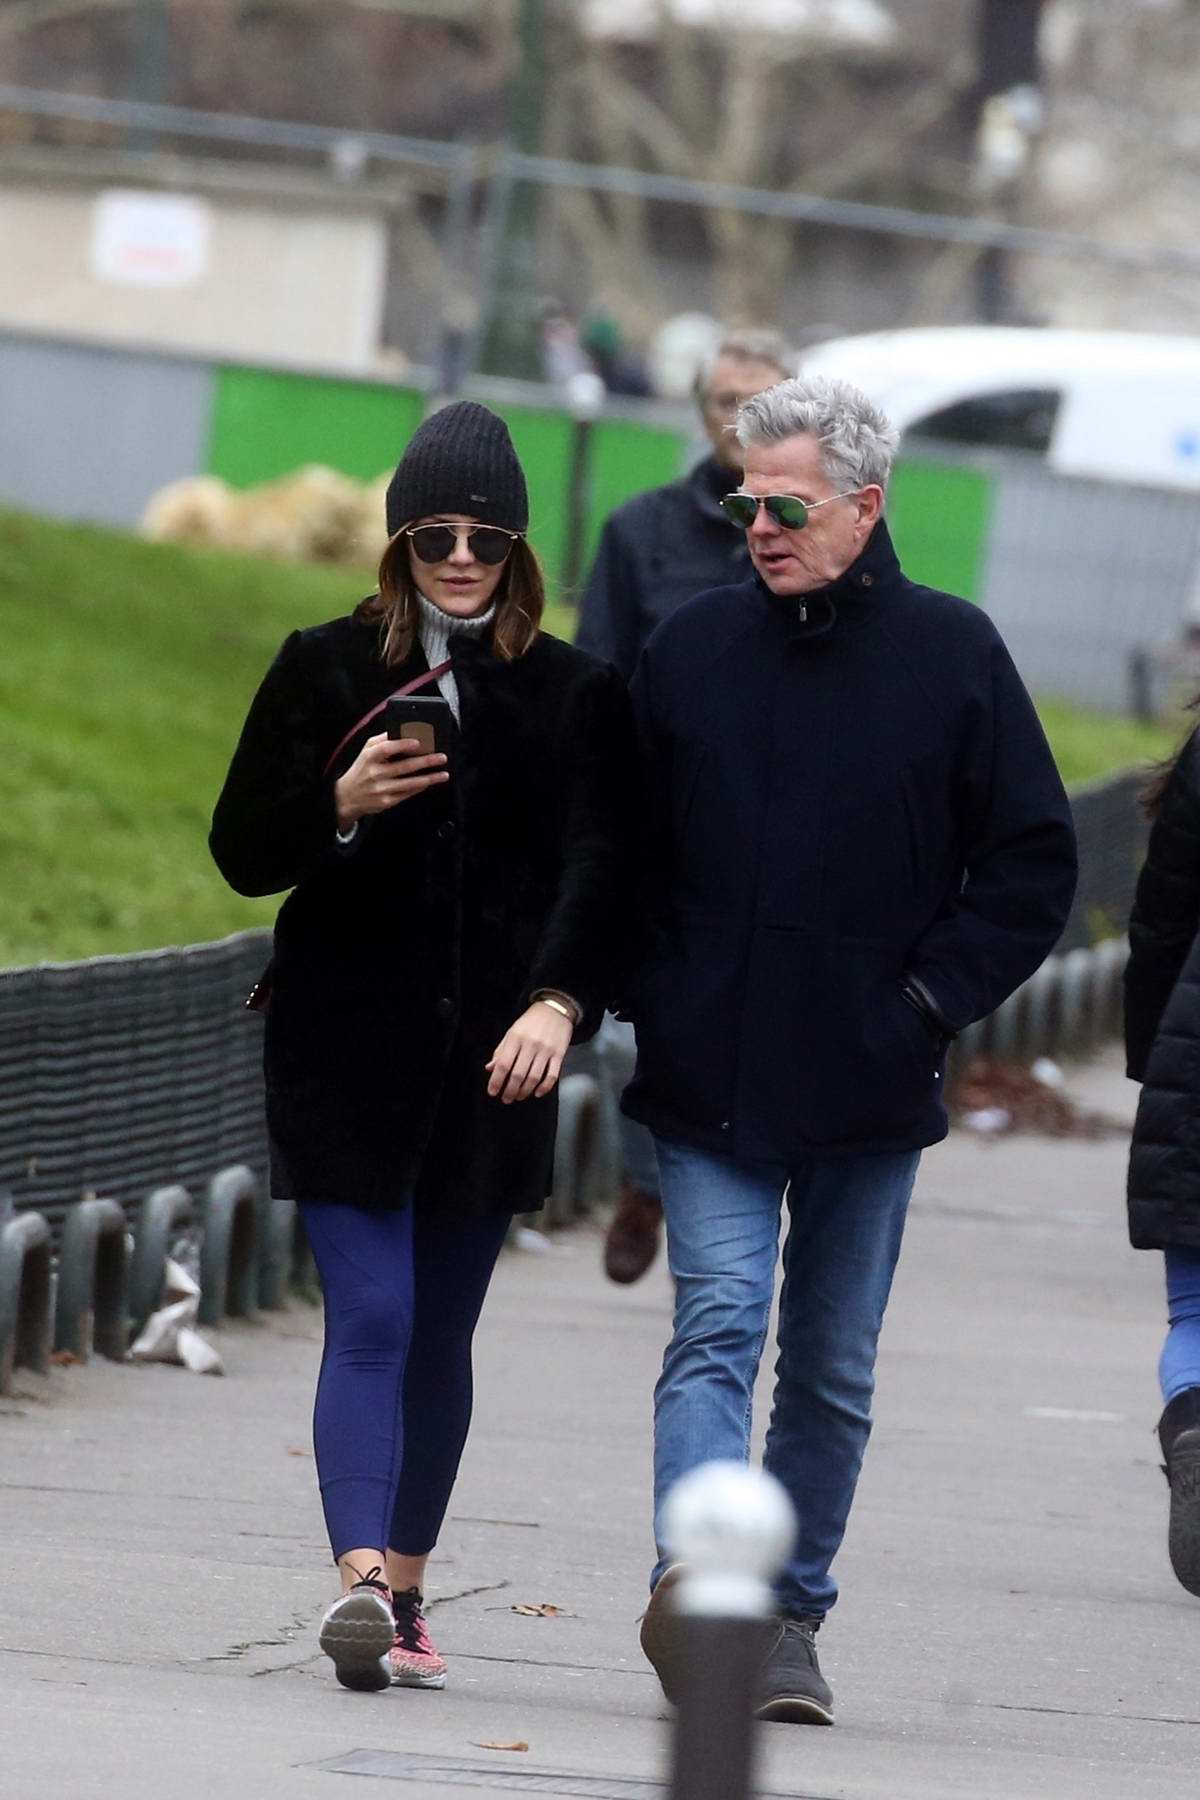 katharine mcphee and david foster take a romantic stroll around the